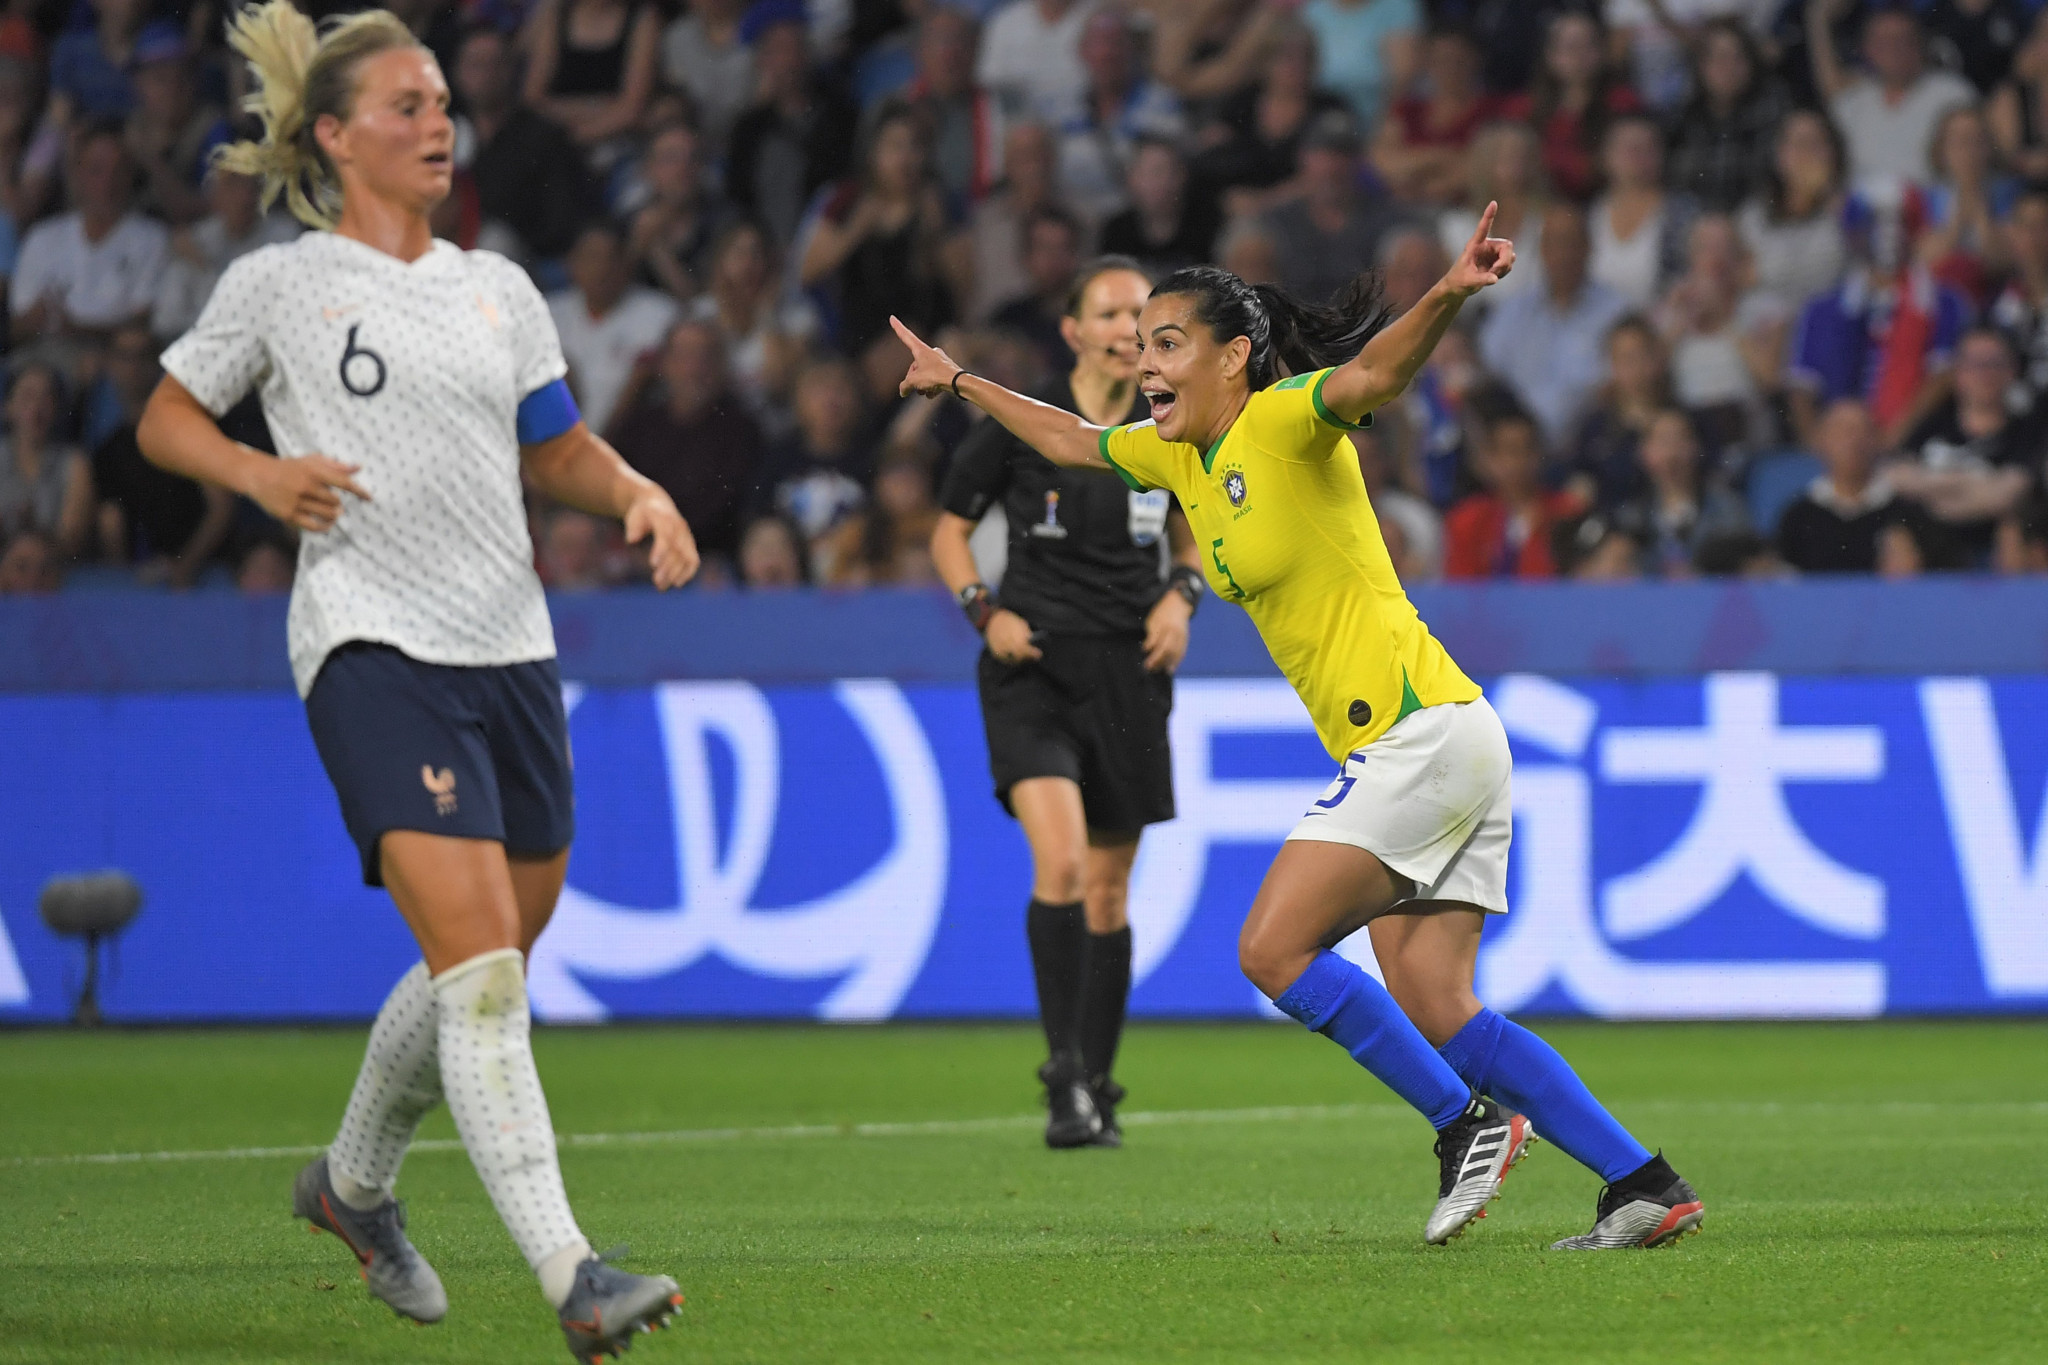 Brazil equalised when Thaisa's driven finish was allowed following a VAR review © Getty Images